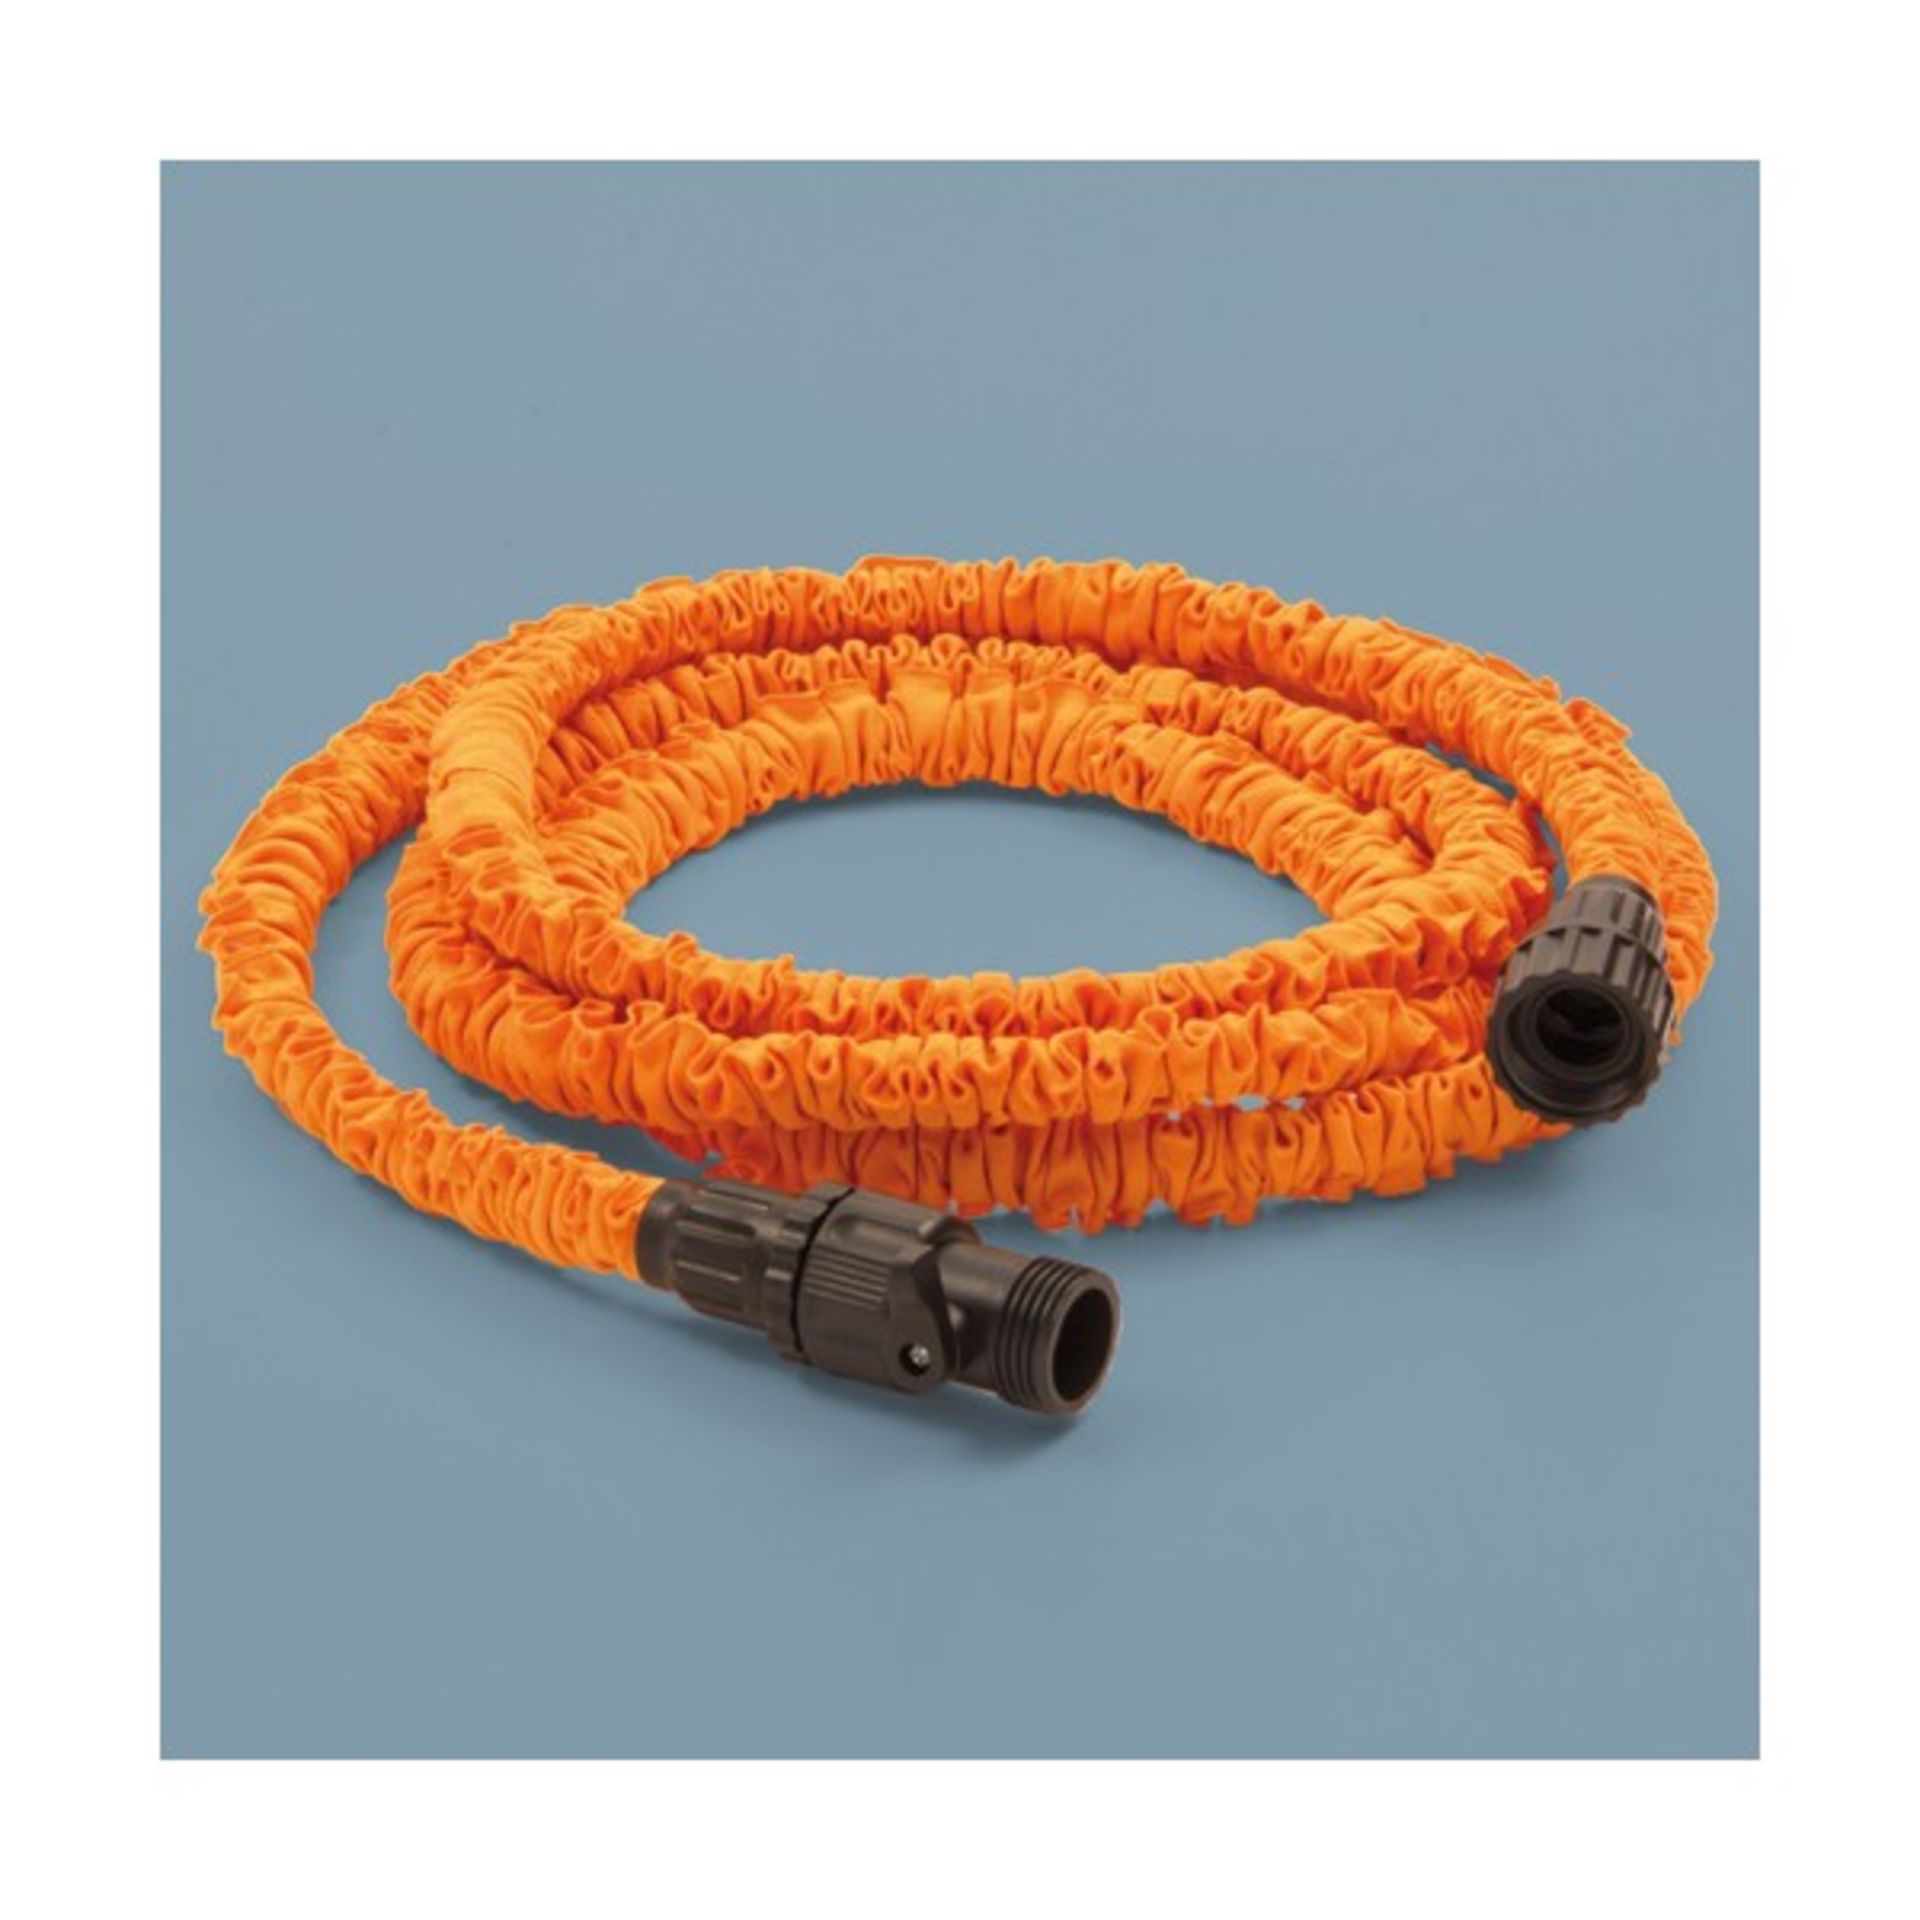 V *TRADE QTY* Brand New 25ft Extendable Hose ISP £19.99 Argos similar X 7 YOUR BID PRICE TO BE